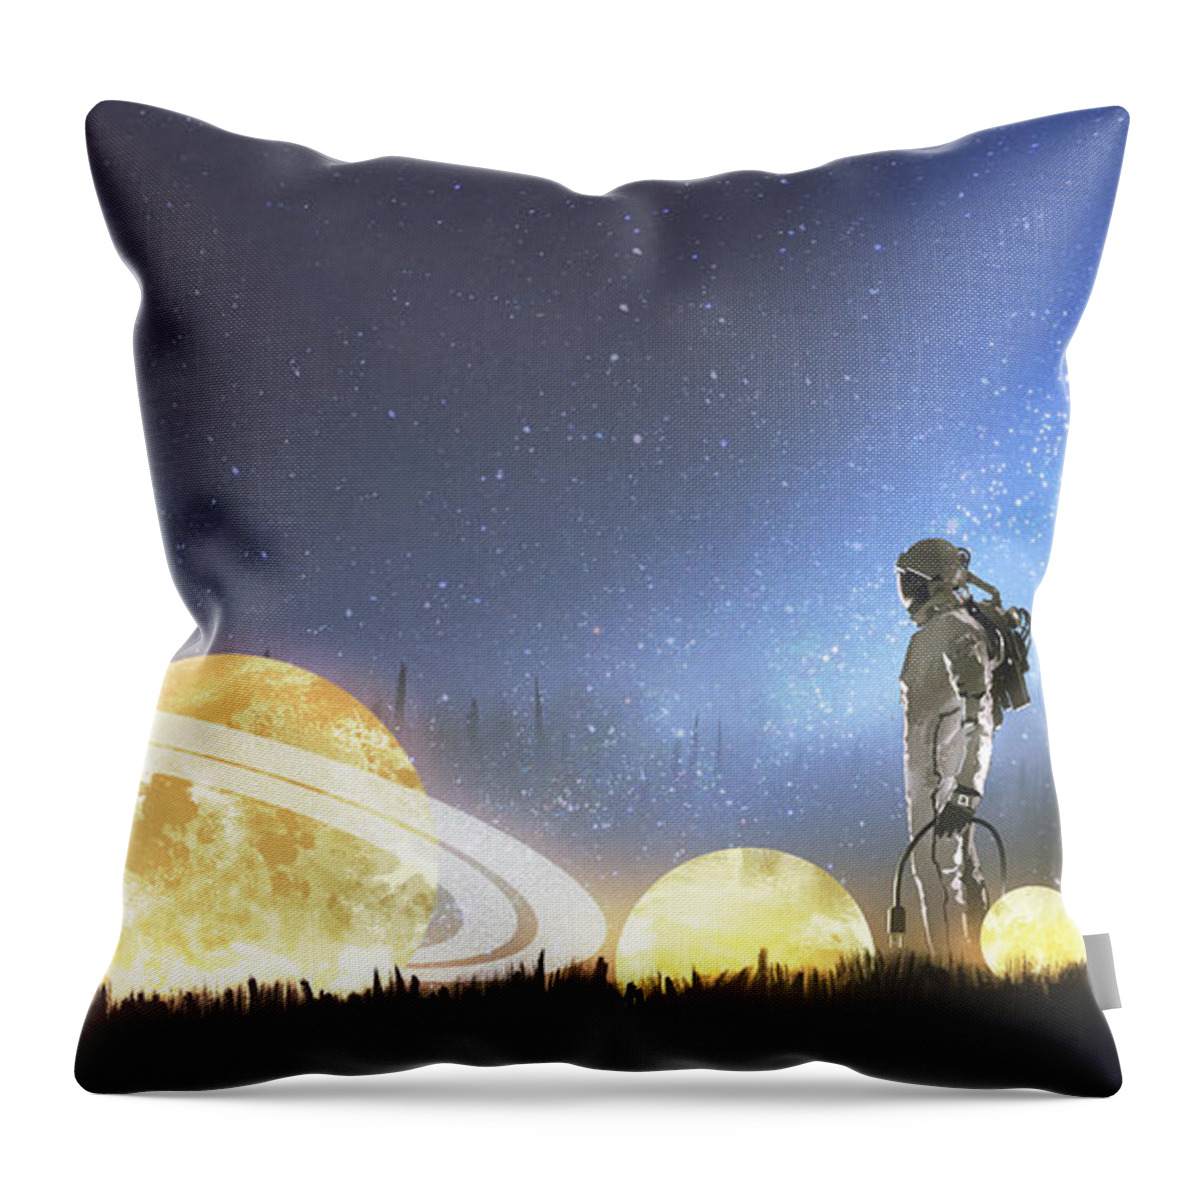 Illustration Throw Pillow featuring the painting Stars on the ground by Tithi Luadthong